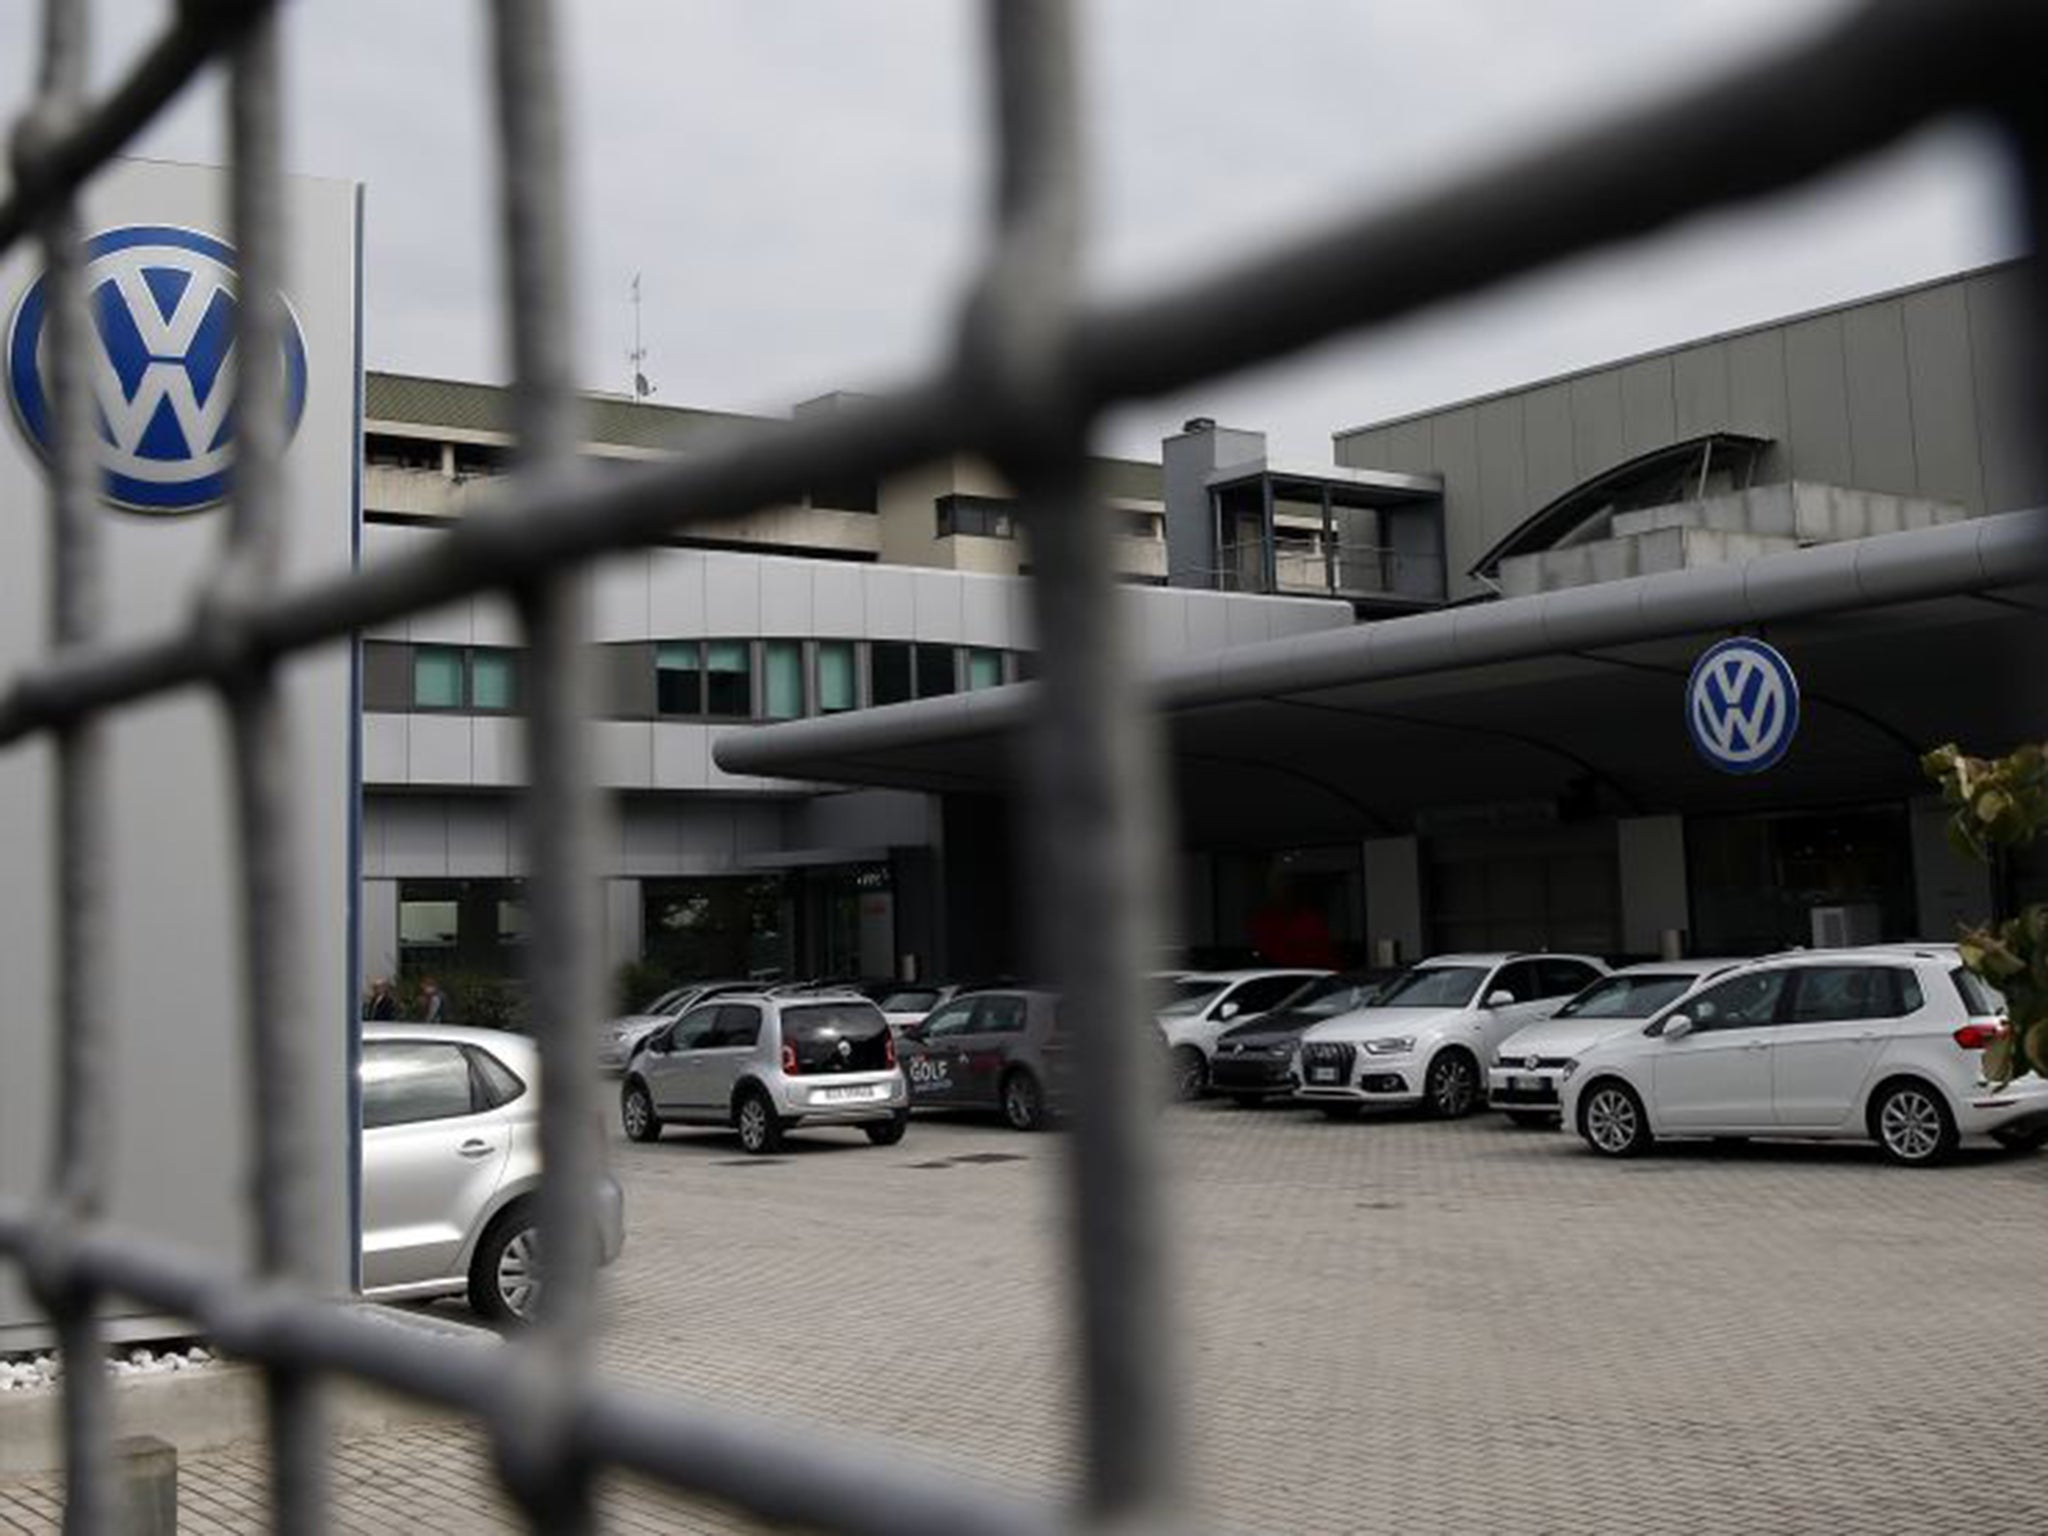 Volkswagen has said that over a million UK vehicles are affected